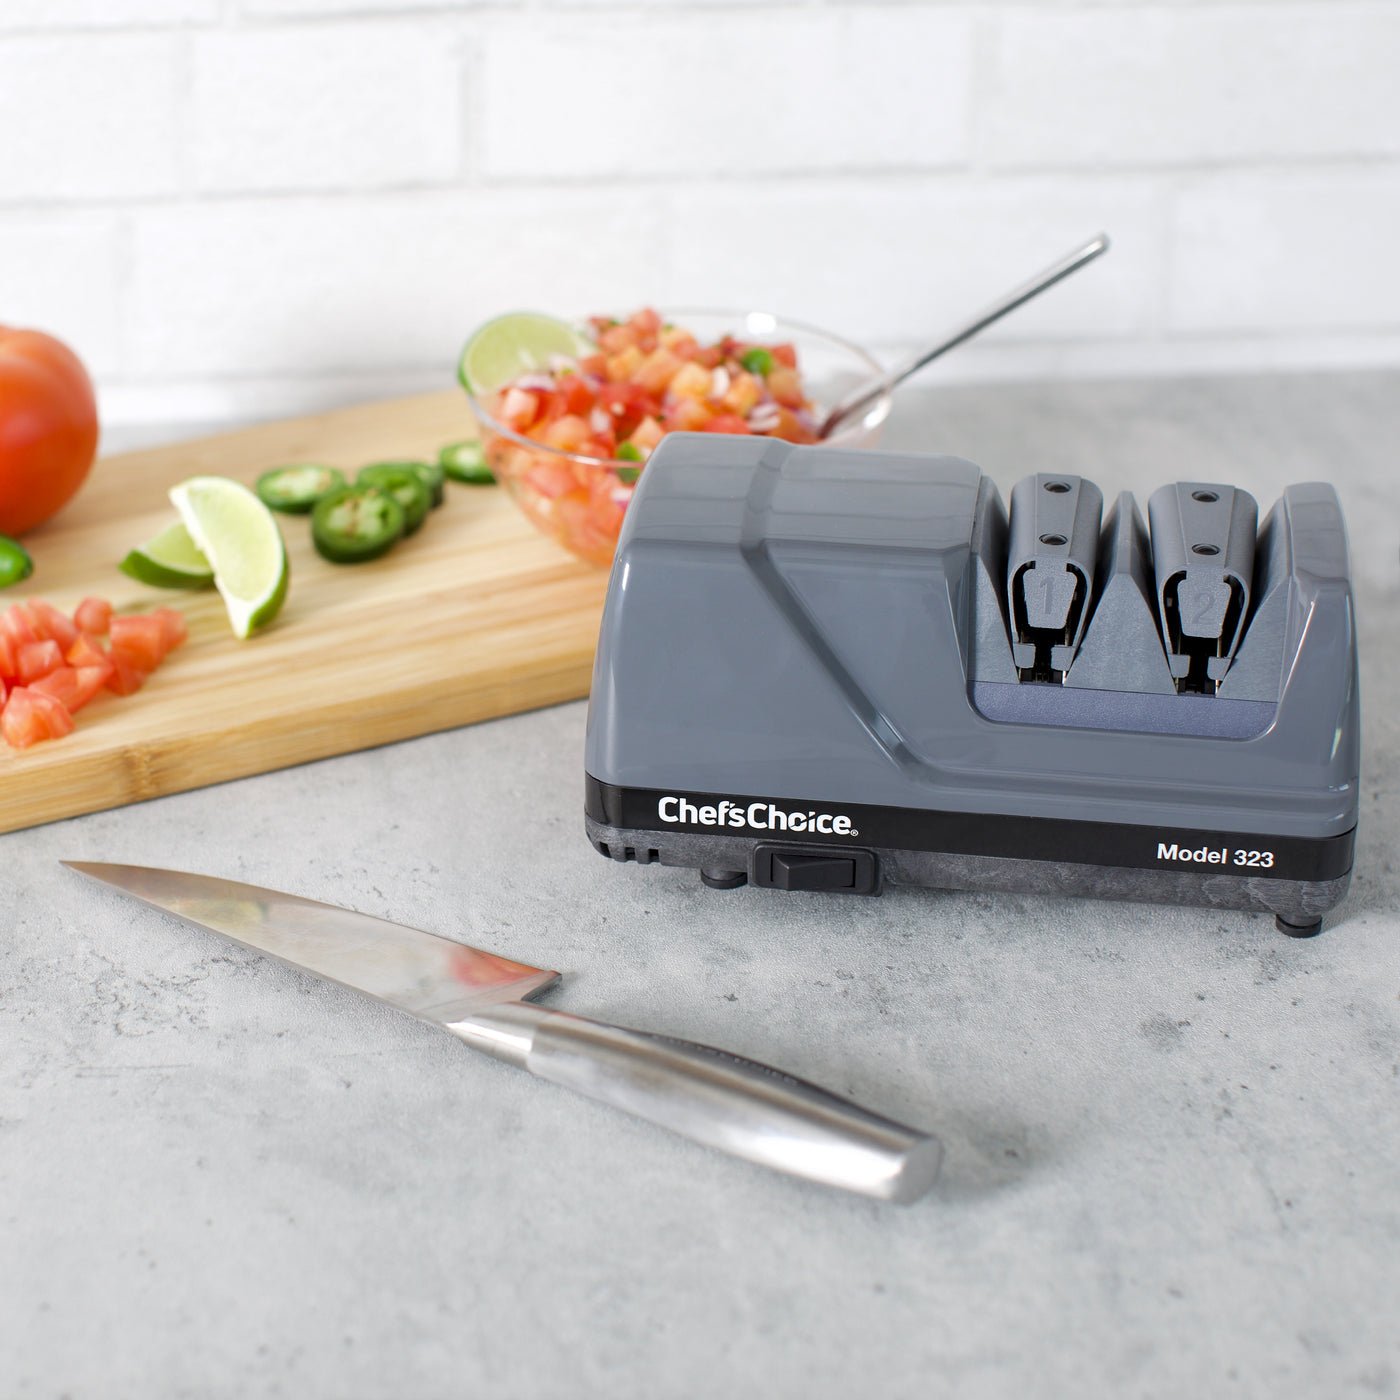 The Chef'sChoice Model 323 Commercial Electric Knife Sharpener is